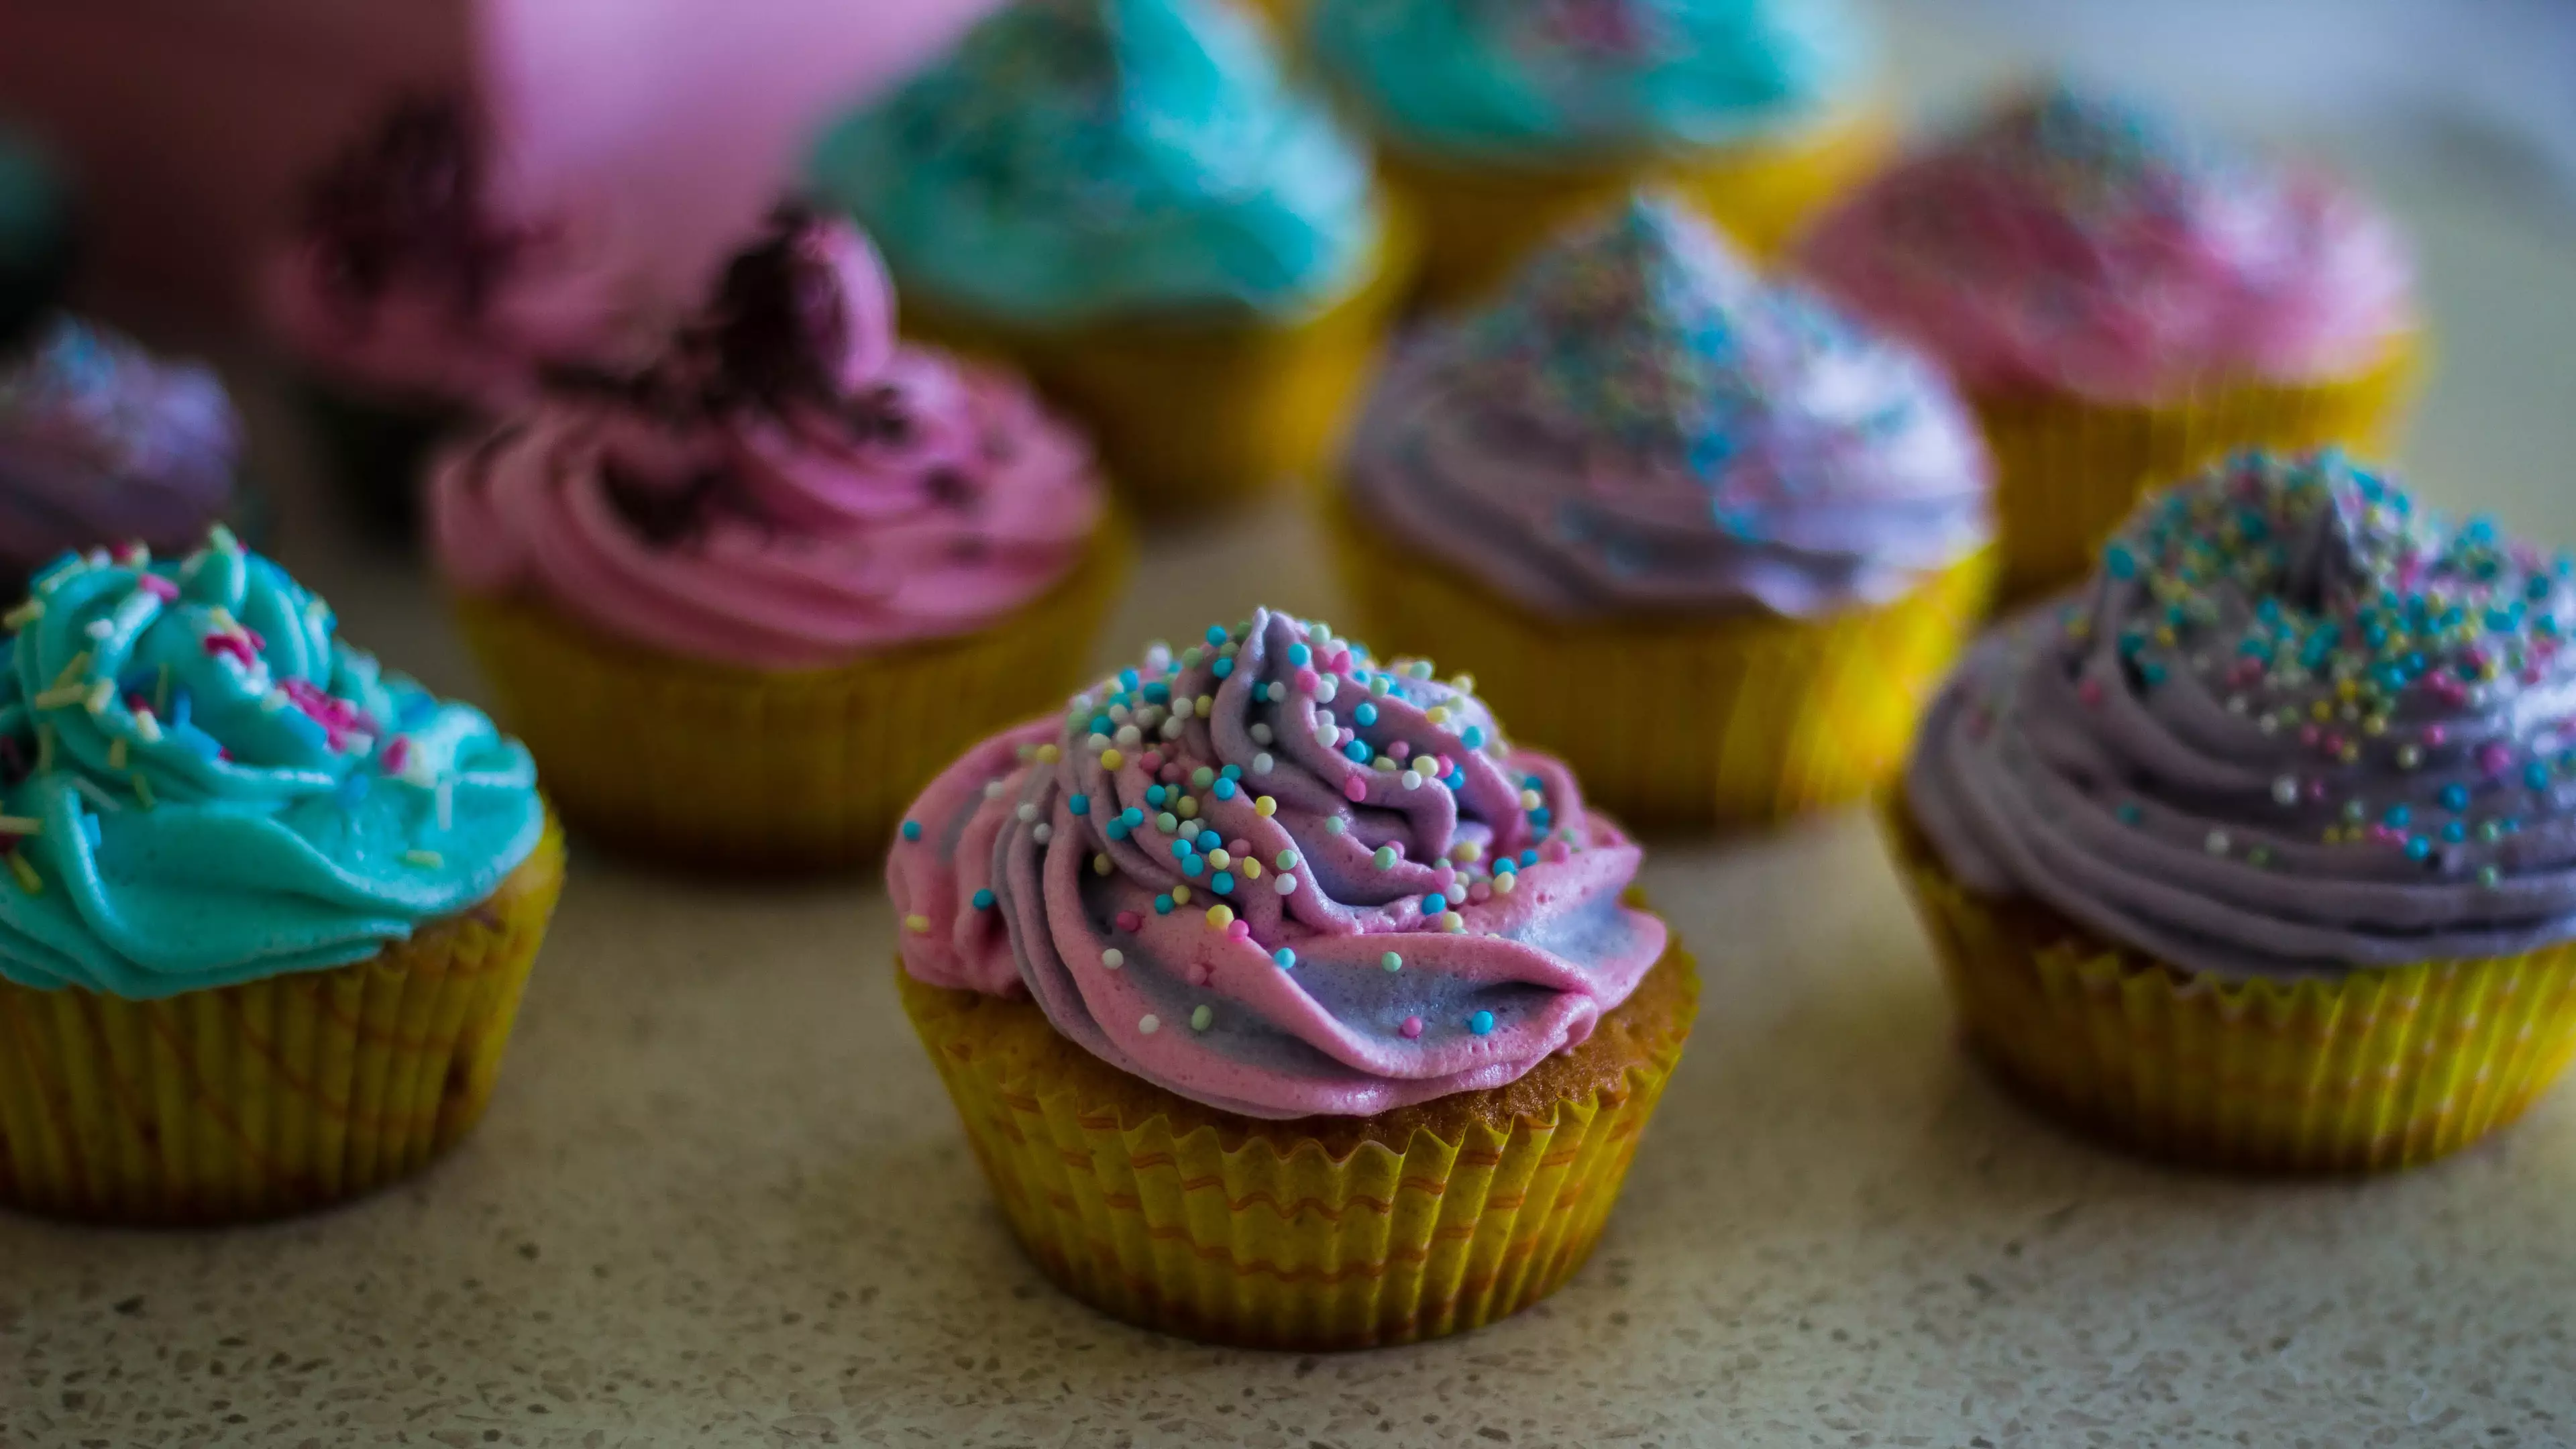 Baker Arrested In Egypt For Making Cupcakes With Penis Decorations 